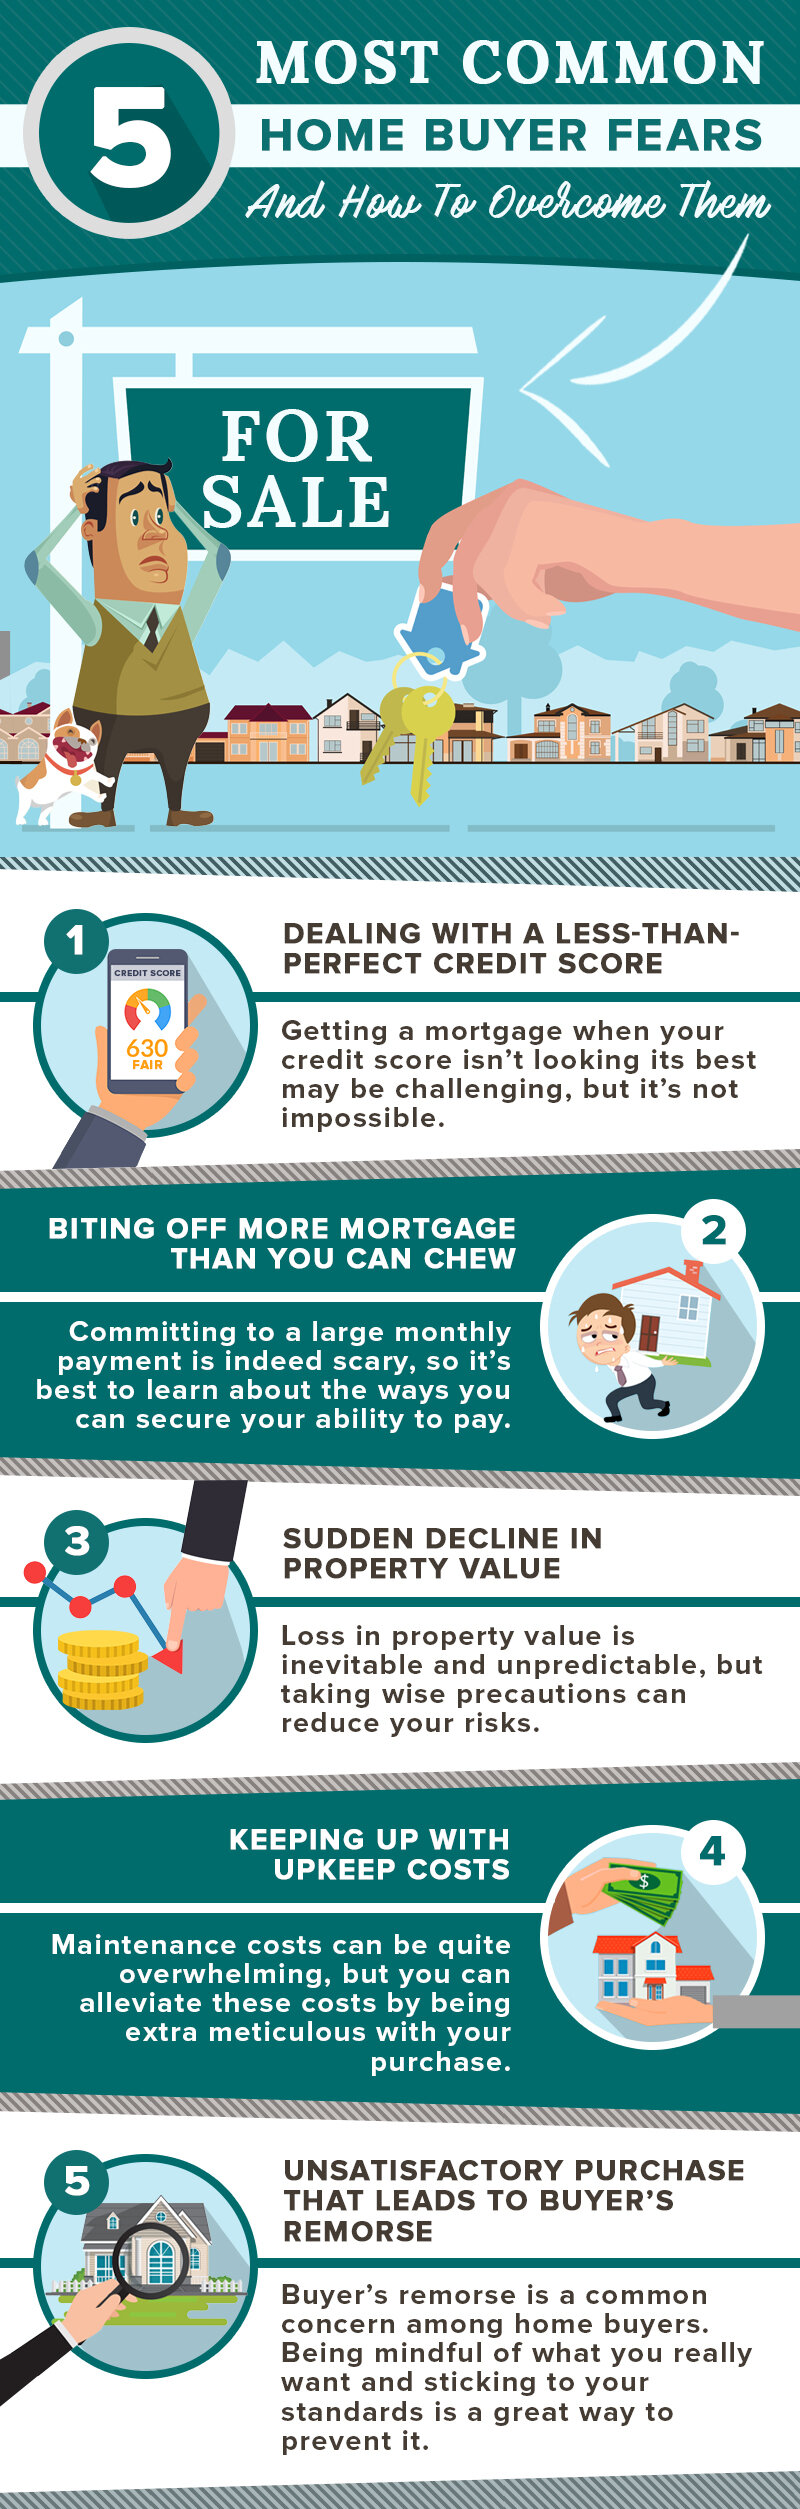 5 Most Common Home Buyer Fears And How To Overcome Them